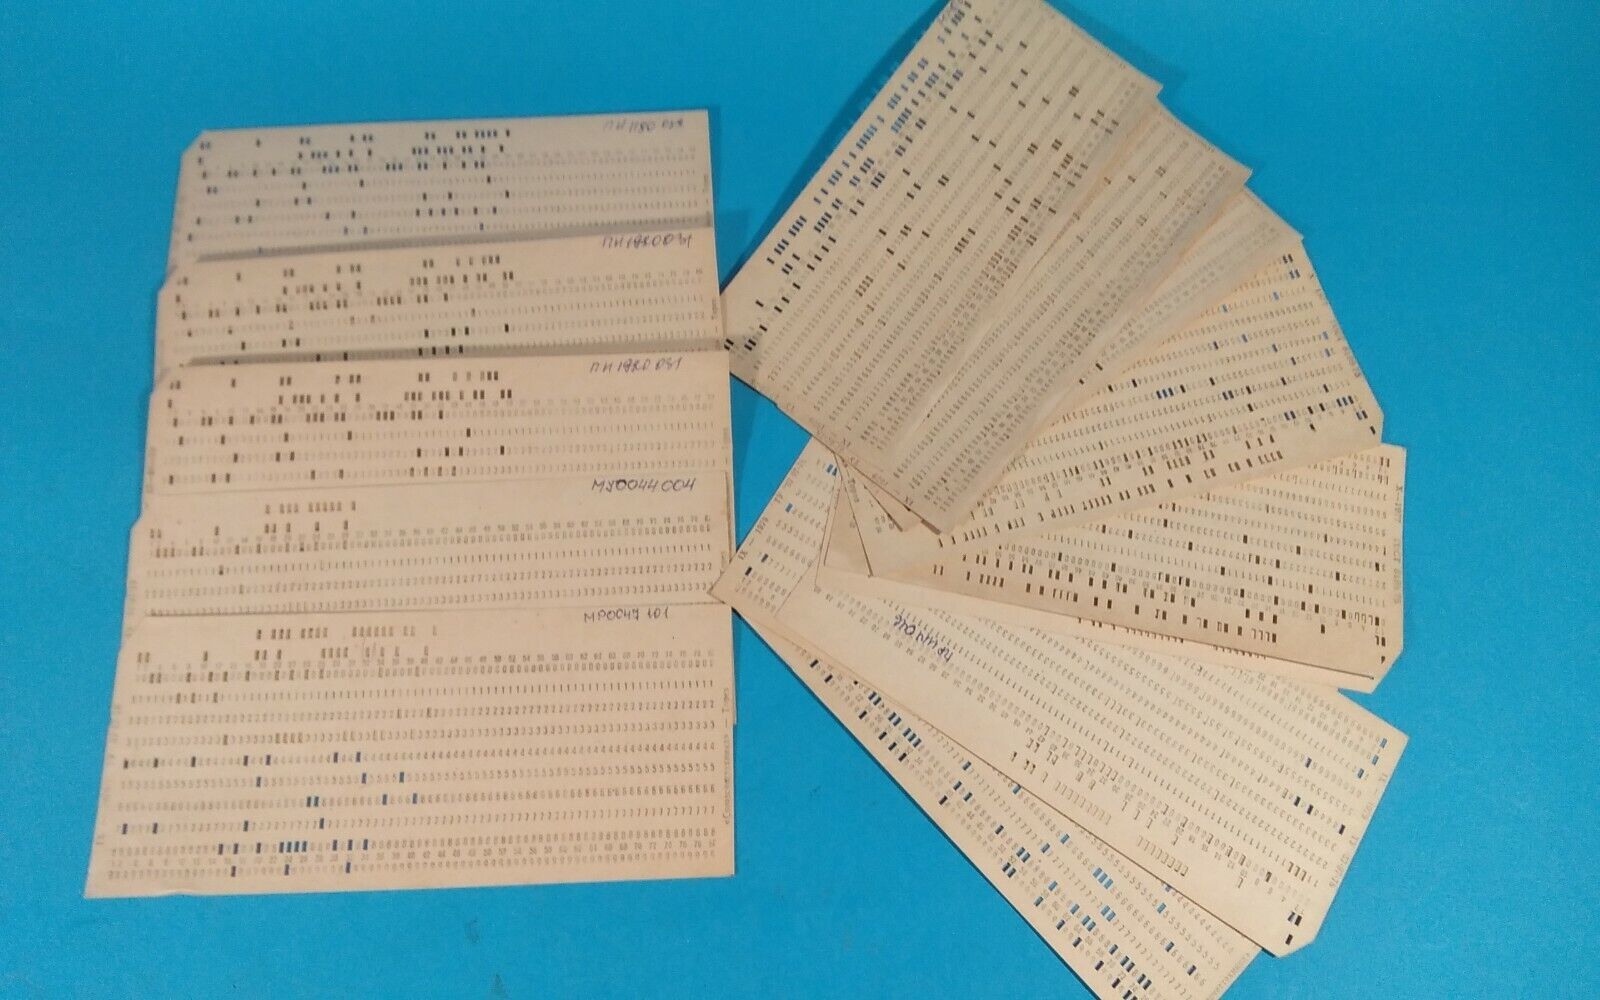  USSR Soviet Computer Mainframe Punch Card Perforated 1970s 10 pcs 8